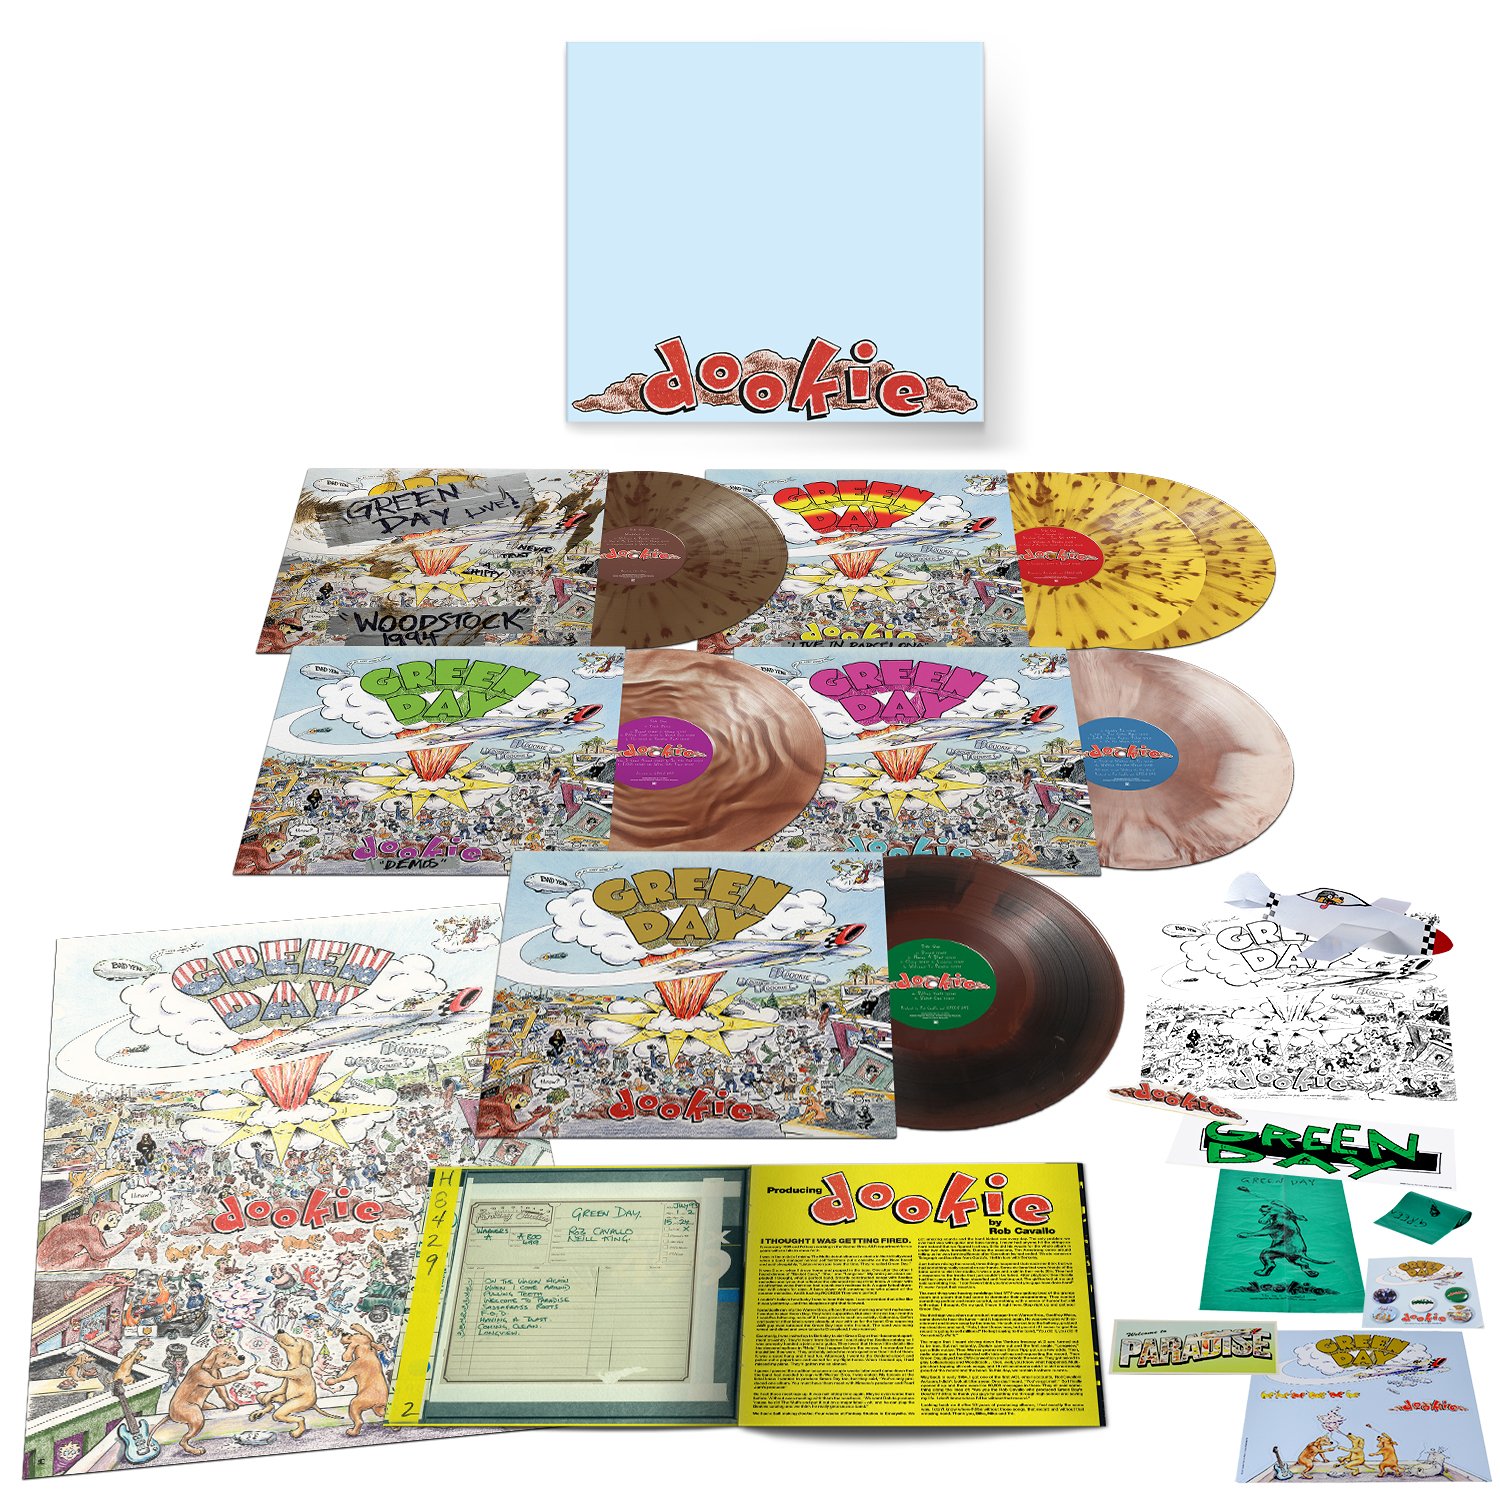 Dookie Limited 30th Anniversary Brown Vinyl Box Set edition